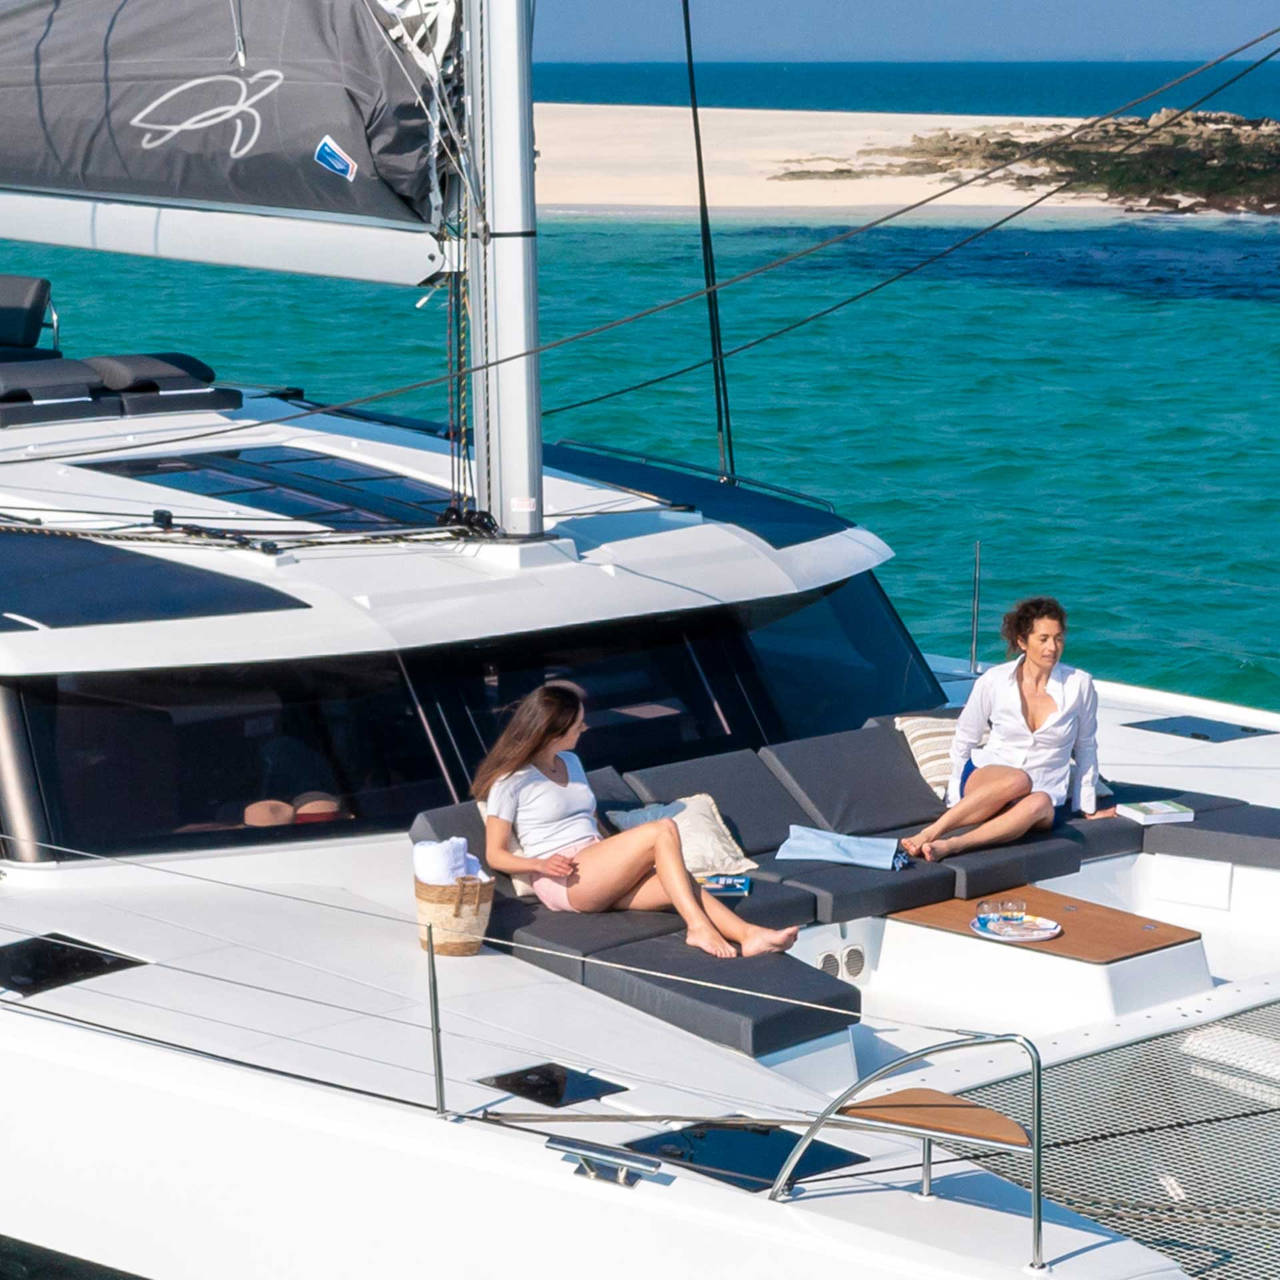 Electric catamarans – changing the way we experience boating vacations?